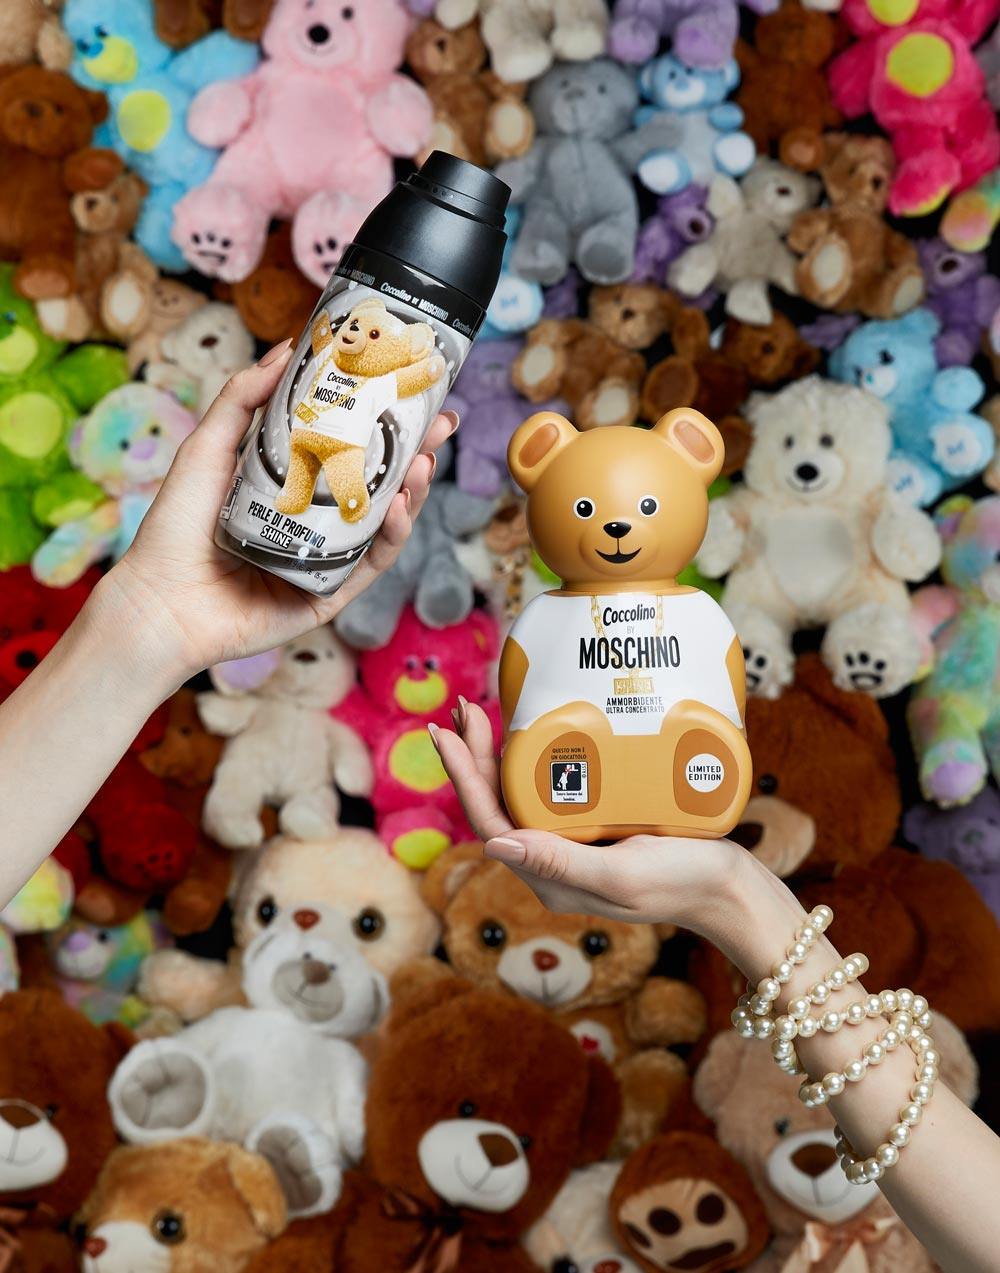 Moschino Coccolino still life photography ad campaign for Vogue Shareable